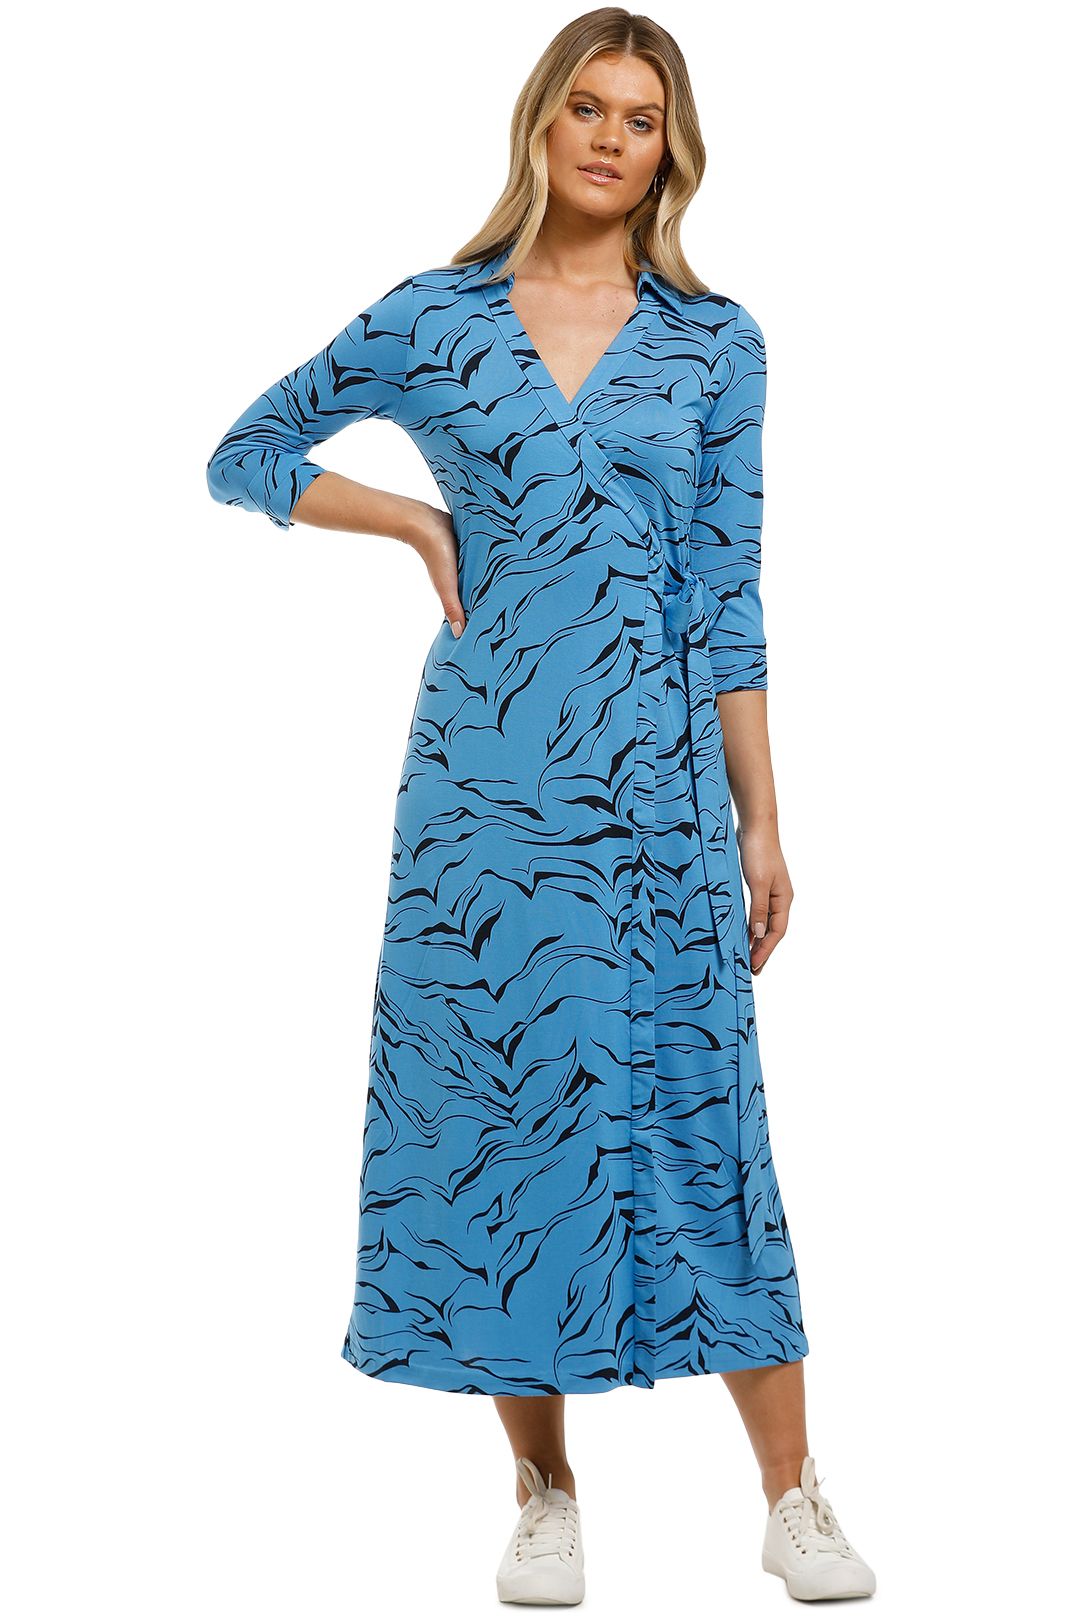 Country Road Wrap Dress Outlet Shop, UP ...